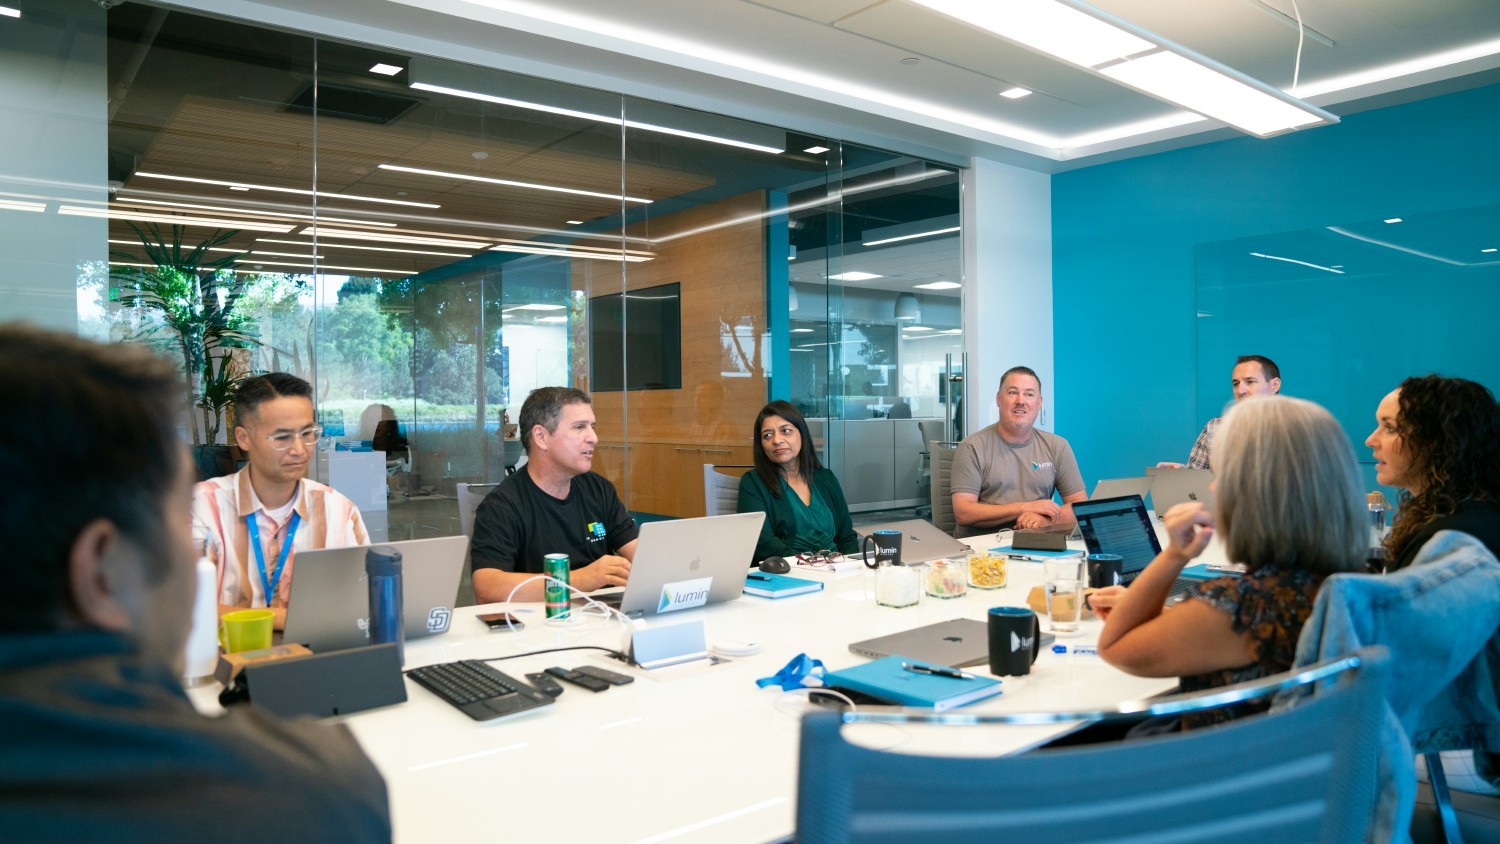 Our teams work across departments to collaborate, strategize, and continuously innovate for our customers.
